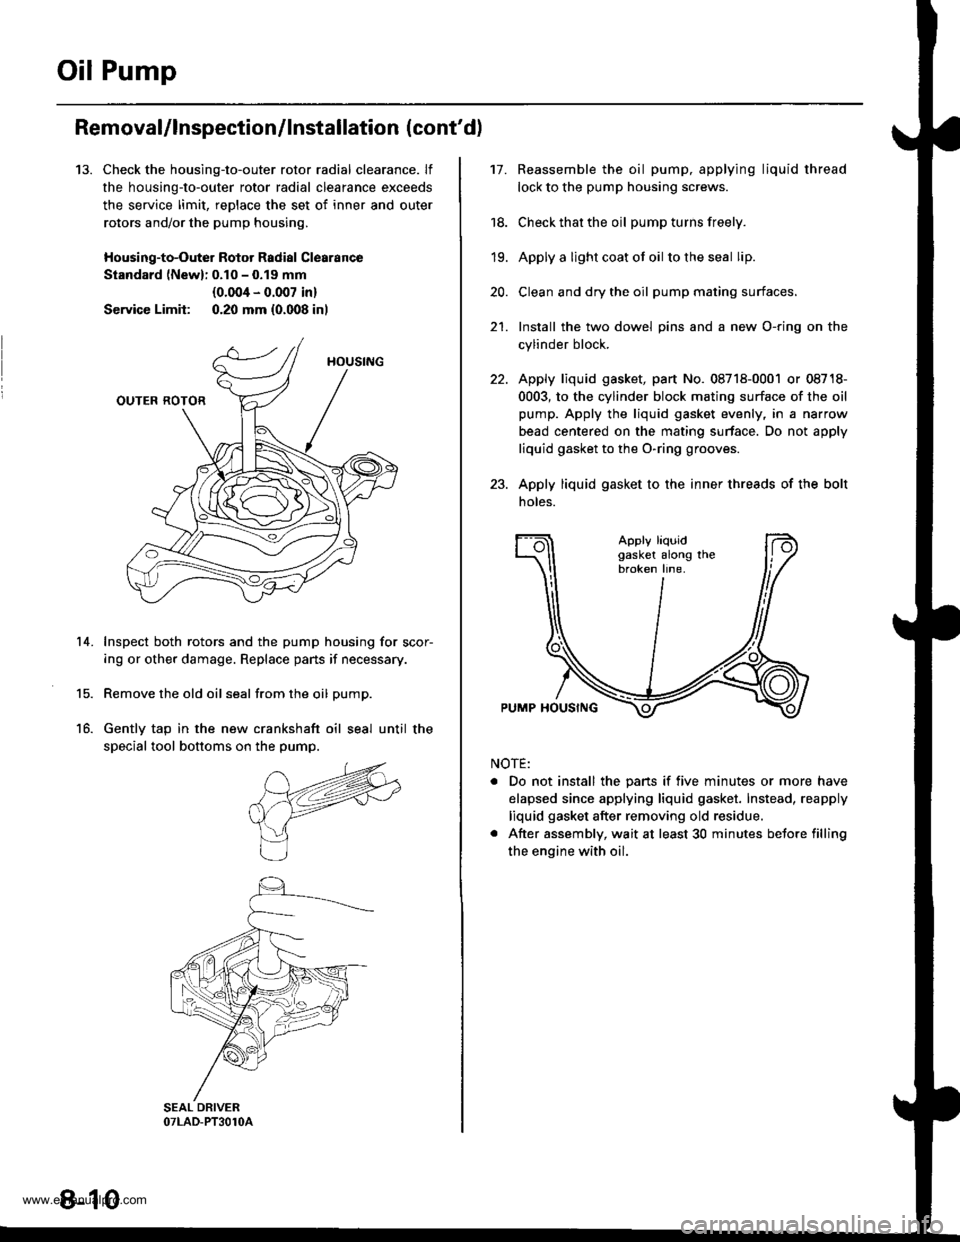 HONDA CR-V 1998 RD1-RD3 / 1.G User Guide 
Oil Pump
13.
Removal/lnspection/lnstallation (contd)
Check the housing-to-outer rotor radial clearance. lf
the housing-to-outer rotor radial clearance exceeds
the service limit, reDlace the set of i